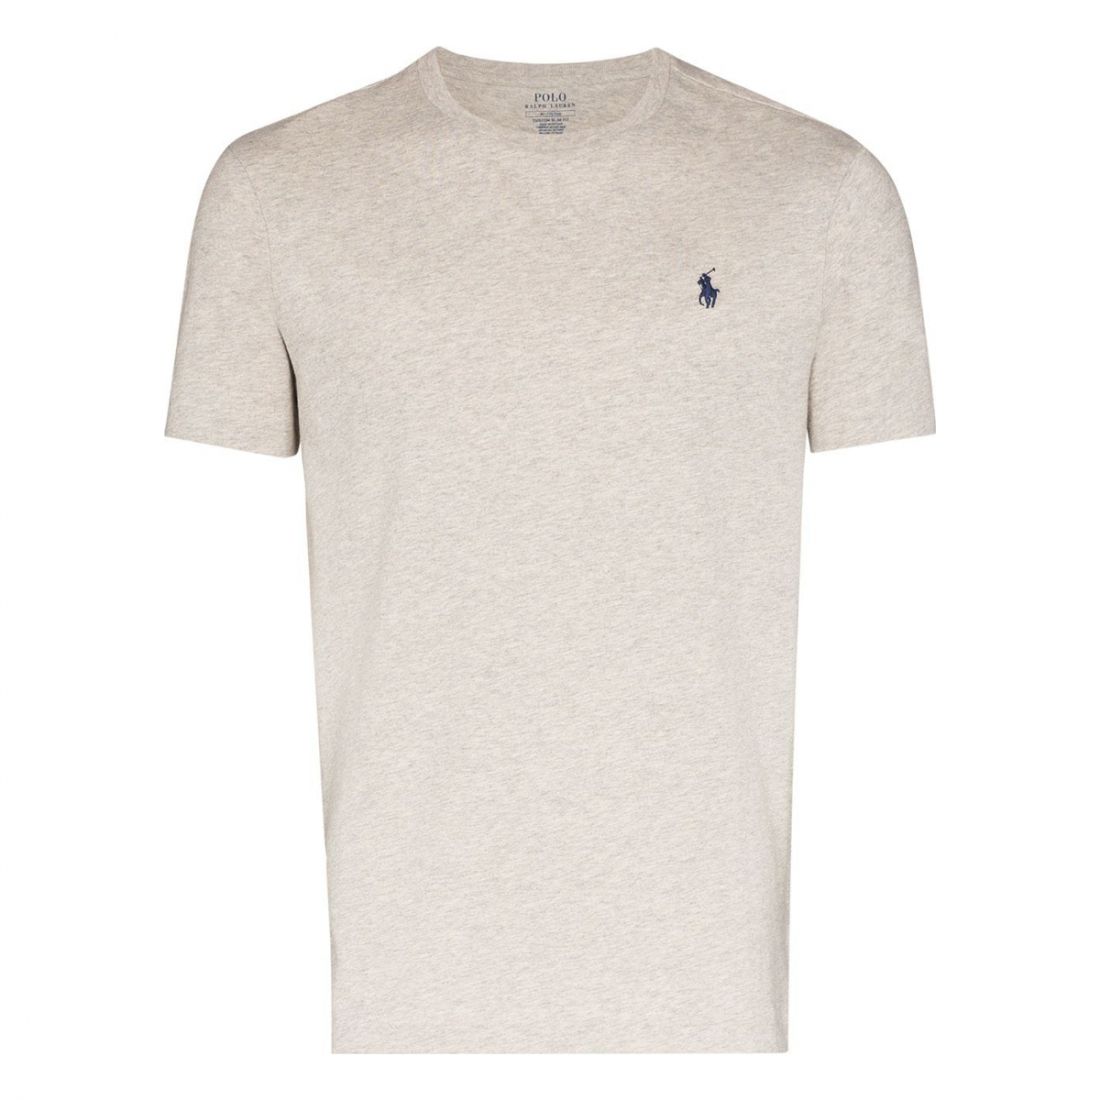 Ralph Lauren - T-shirt 'Polo Pony Embroidered' pour Hommes